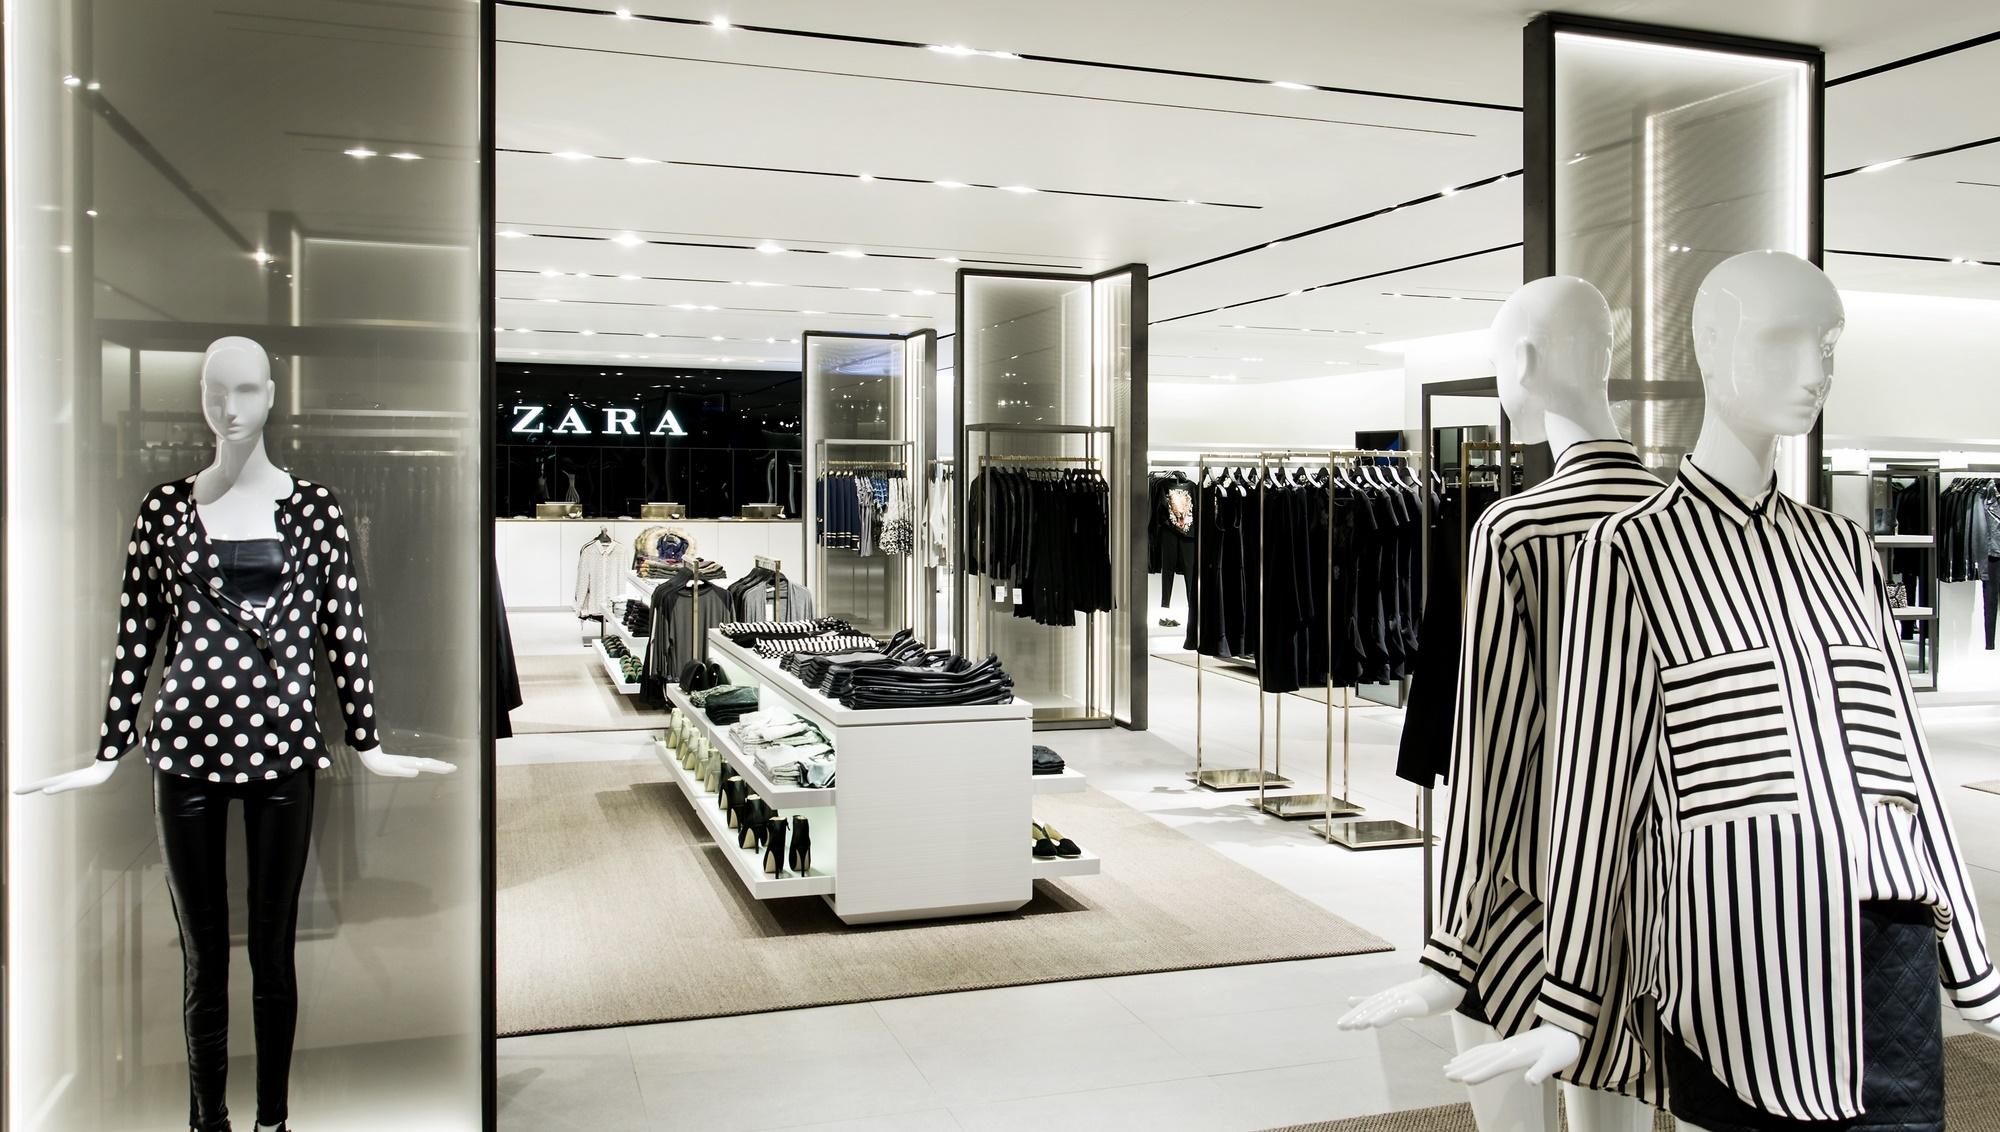 Zara's Biggest Store From South East Europe Opened In AFI Cotroceni. Shopping In Romania's Biggest Store From South East Europe Opened In AFI Cotroceni. Store Wallpaper